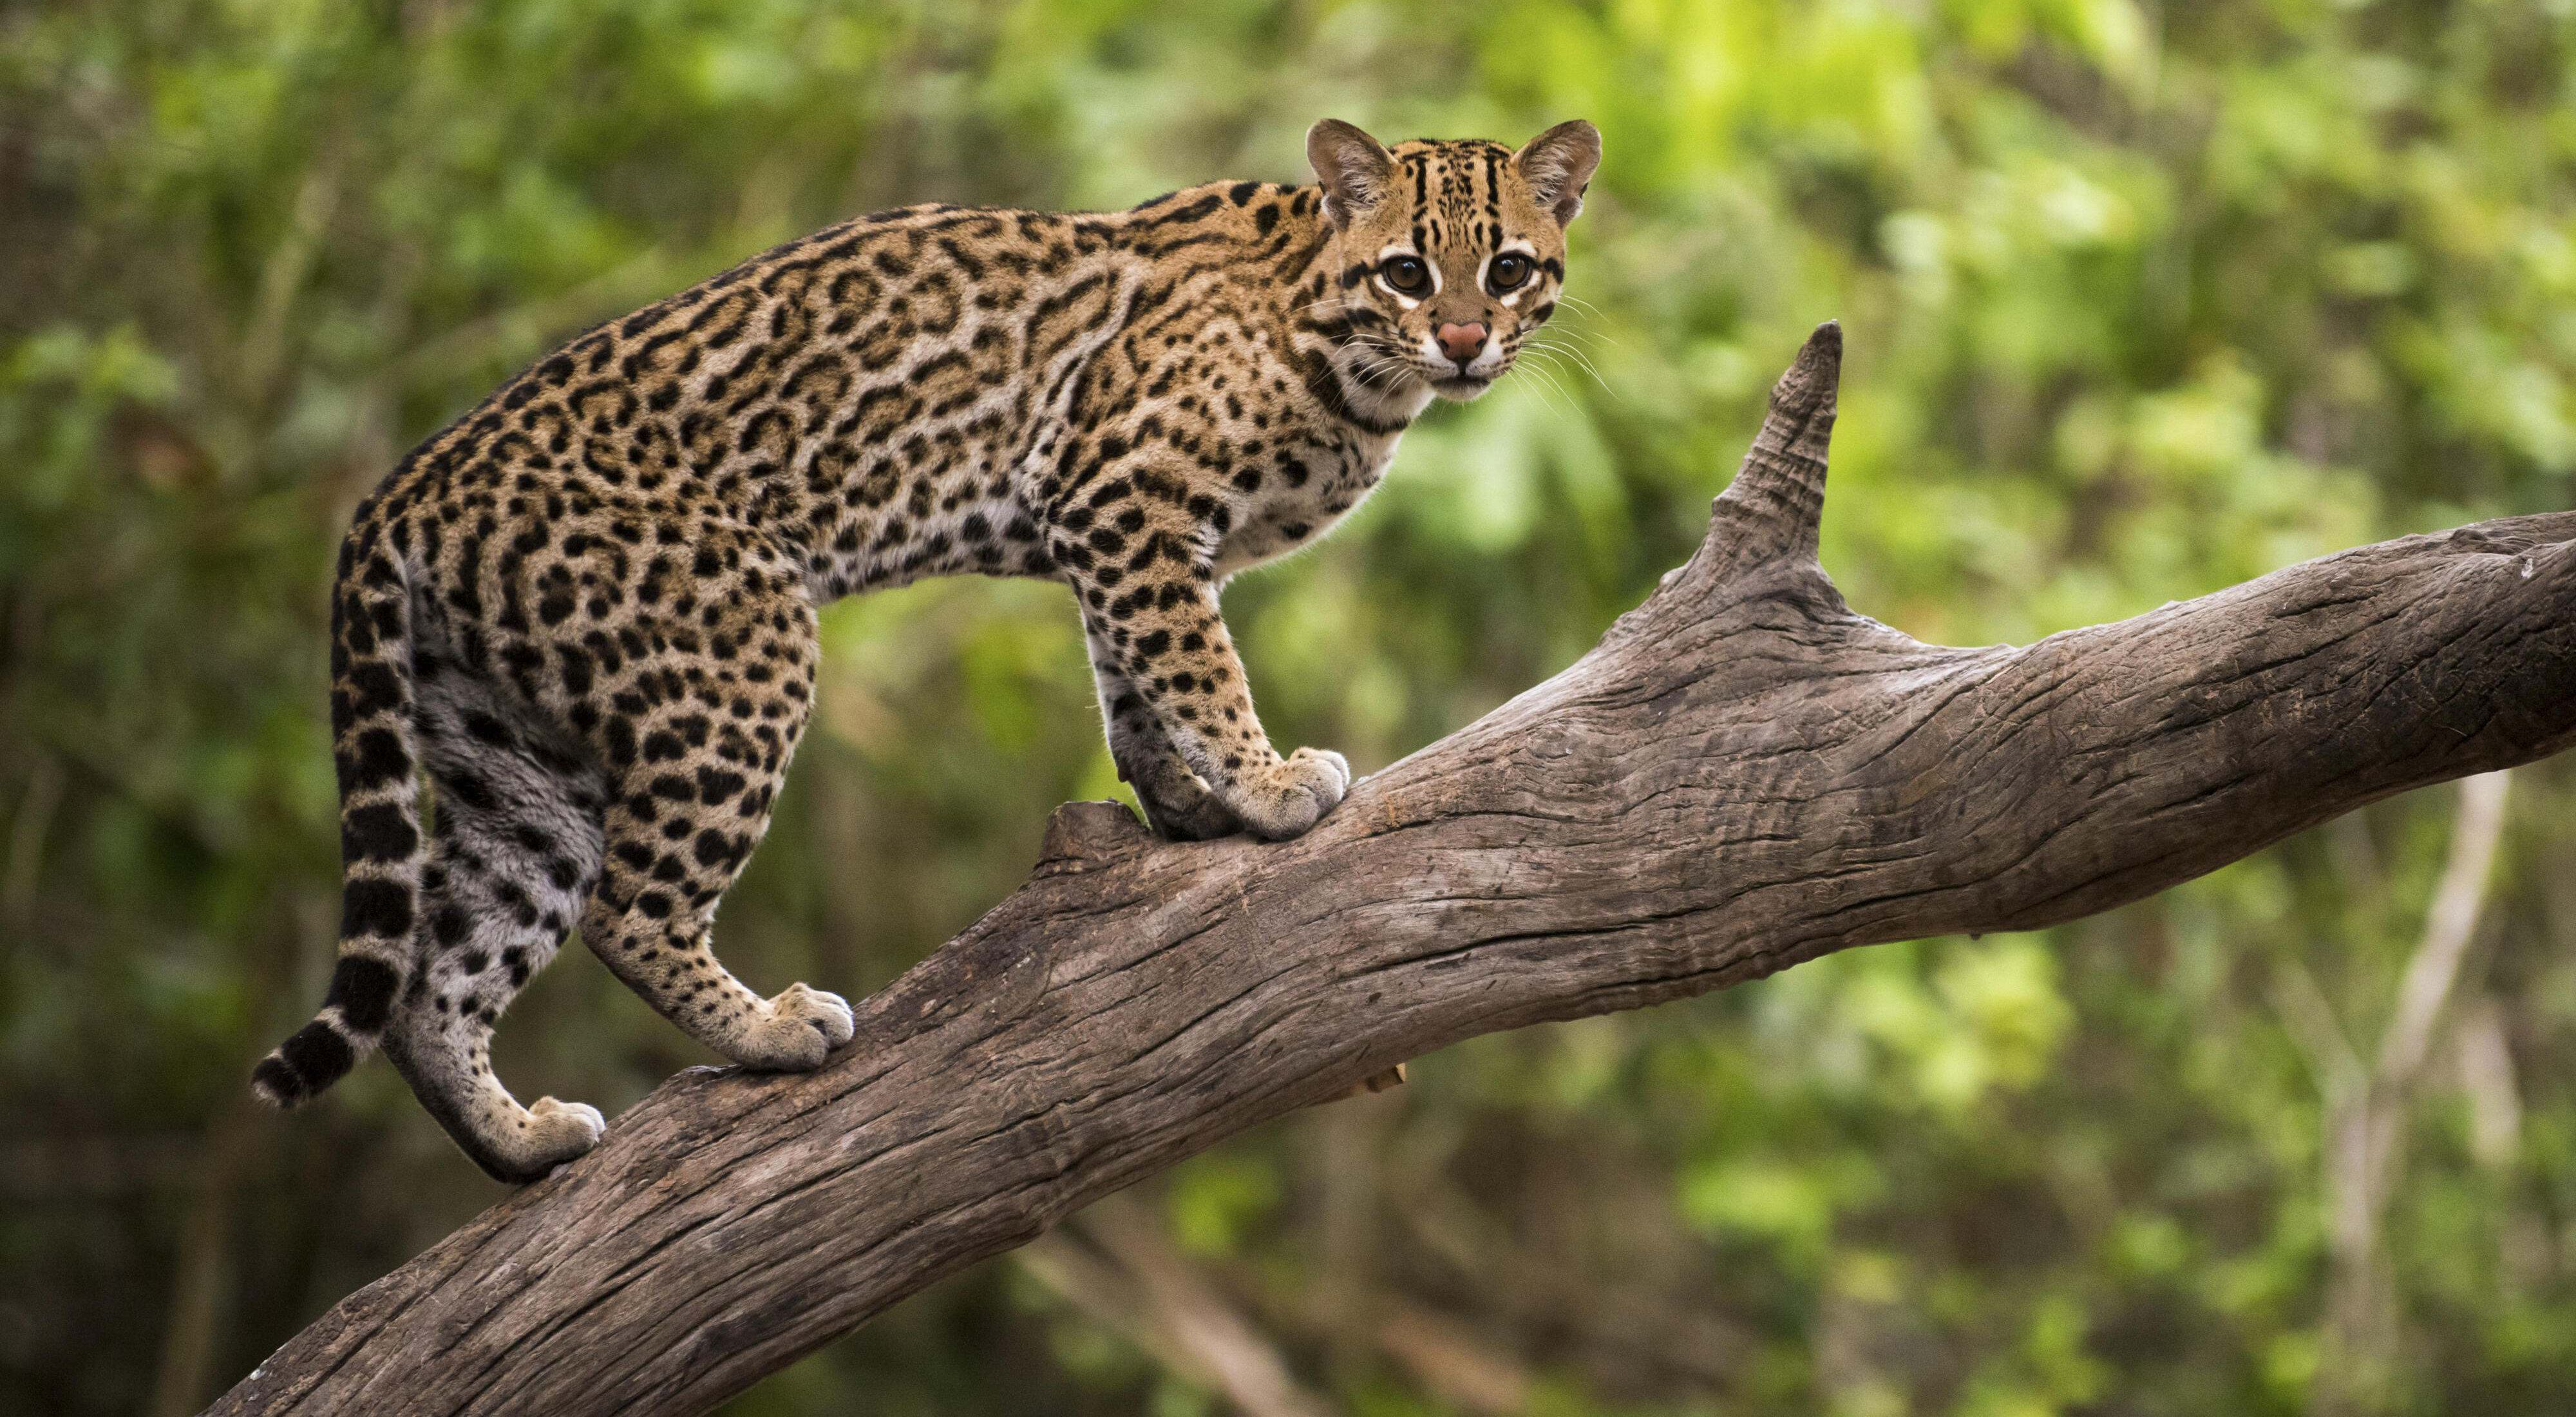 Closeup of an ocelot standing on a branch and looking at the camera.